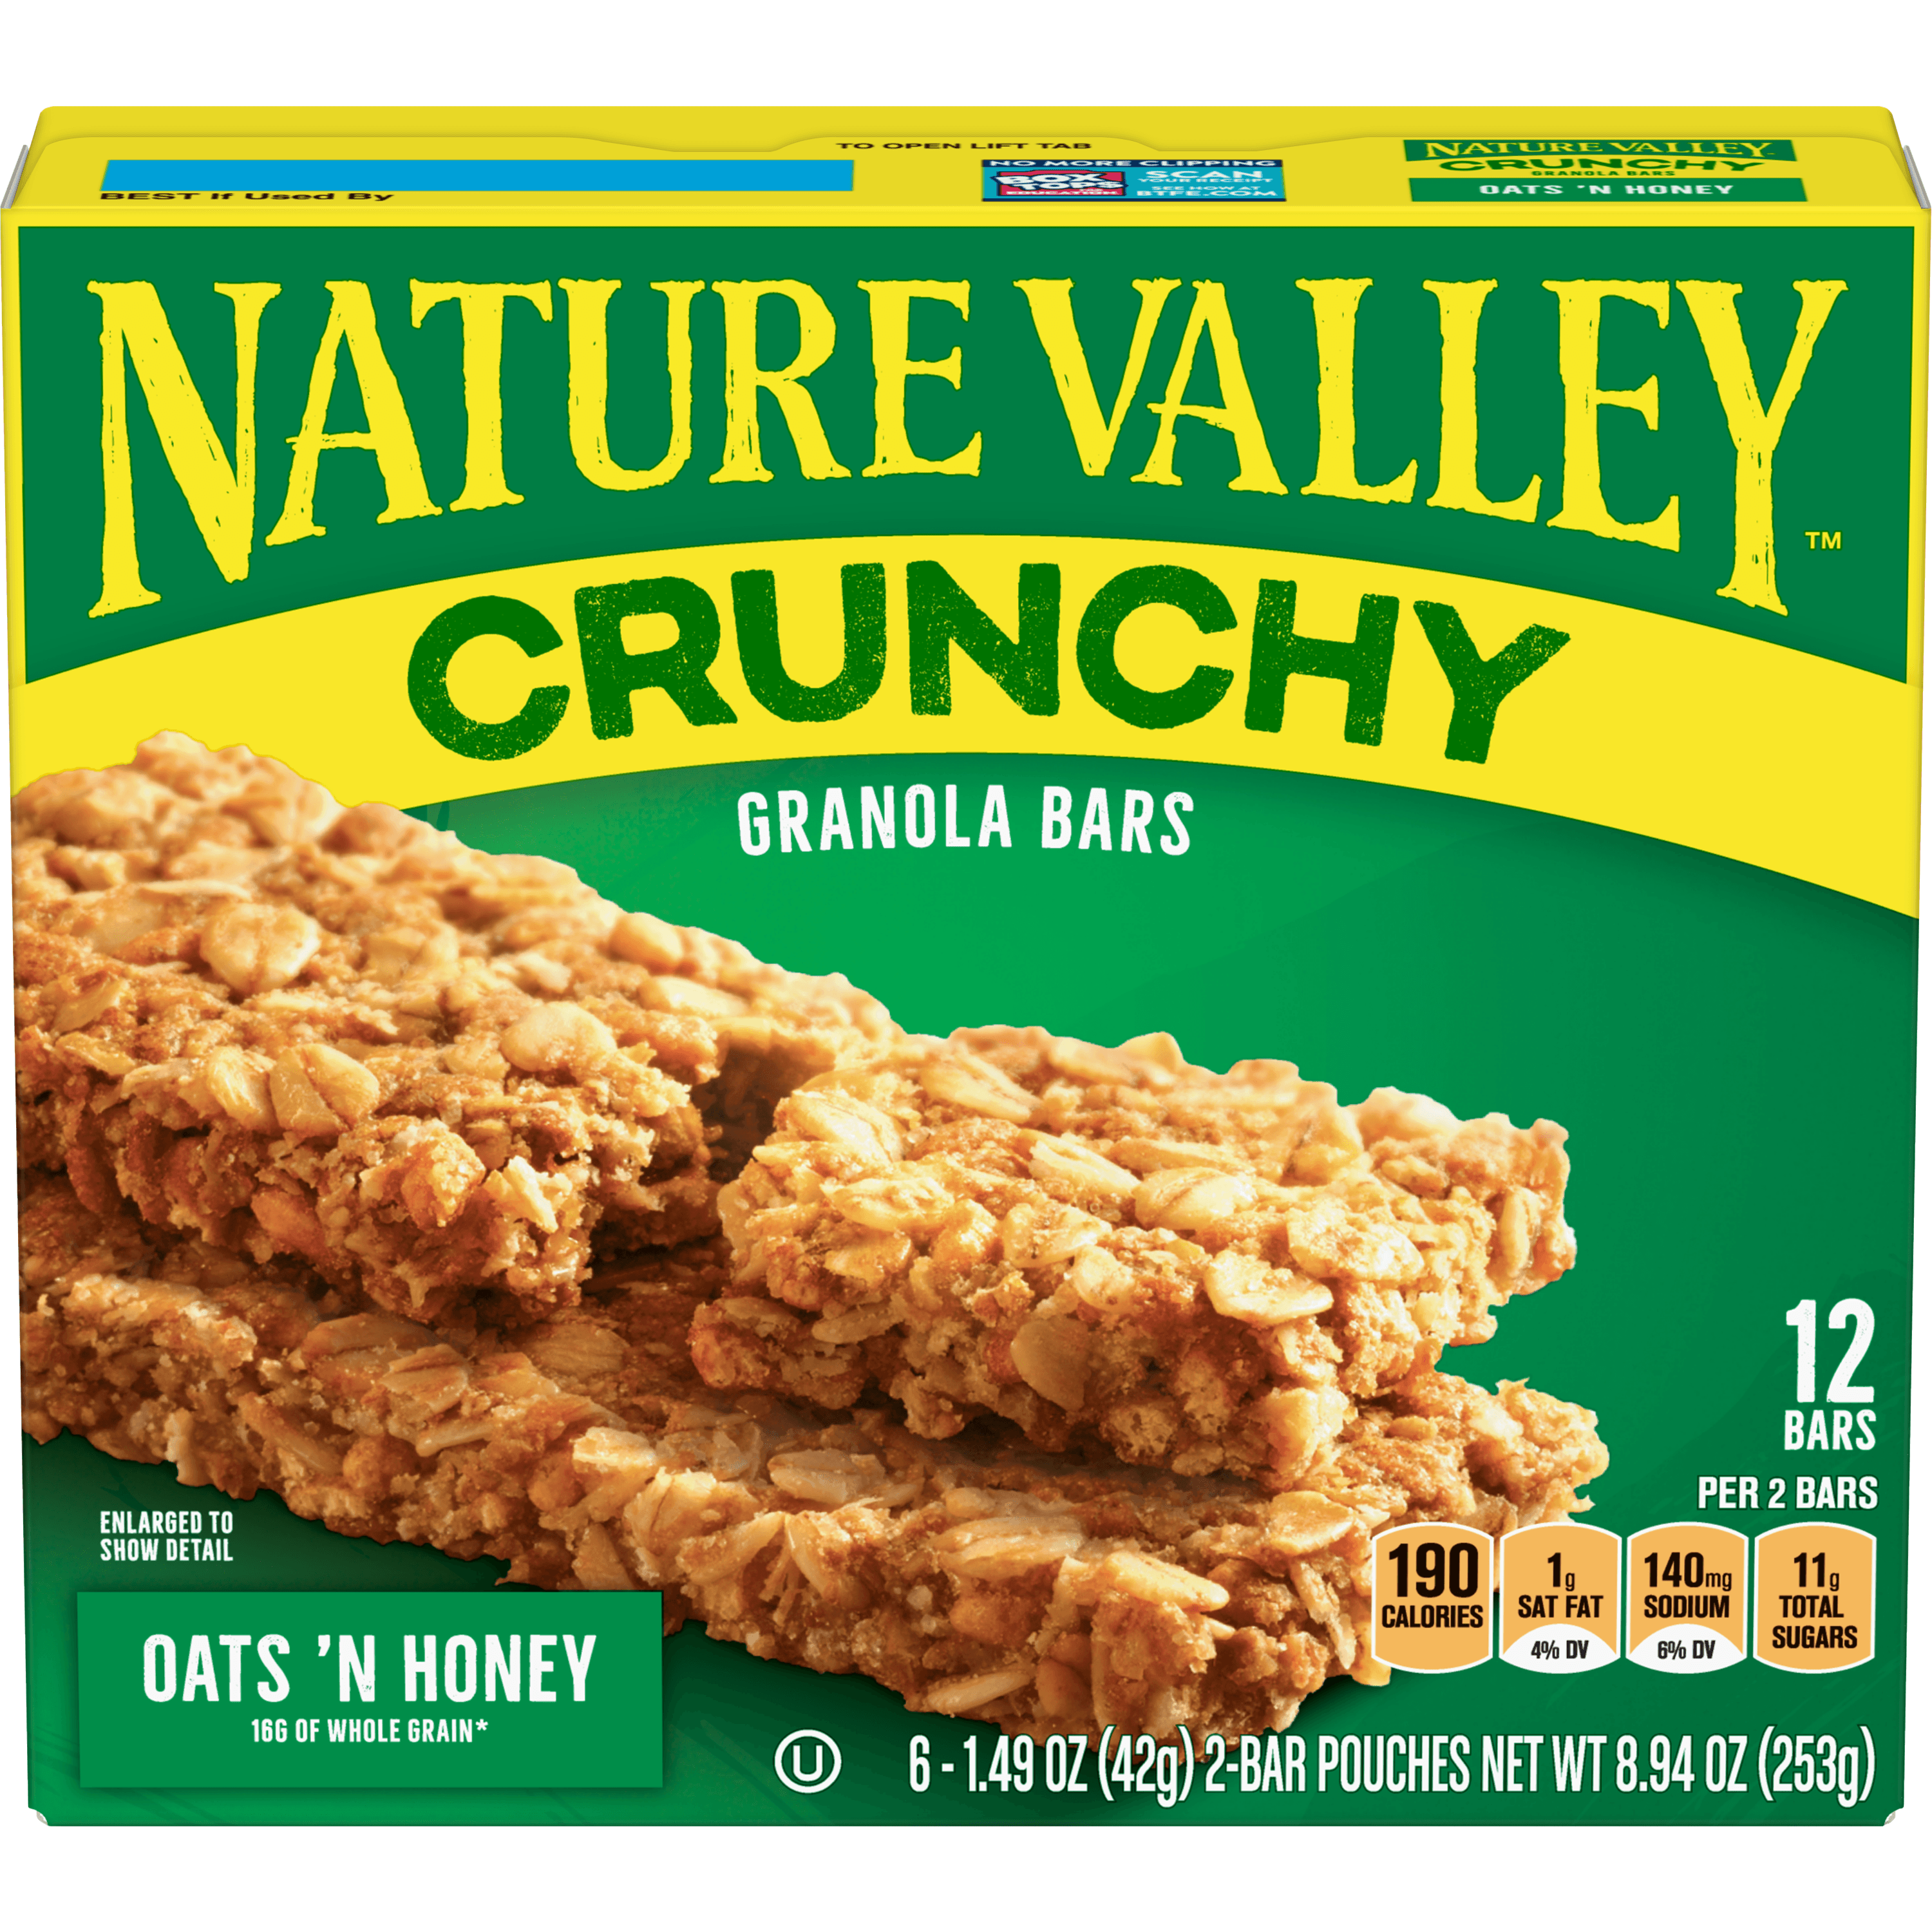 Is It Vegan Nature Valley Crunchy Granola Bars Oats N Honey Six 1 5 Ounce 2 Bar Pouches Per Box 2 Pack Spoonful